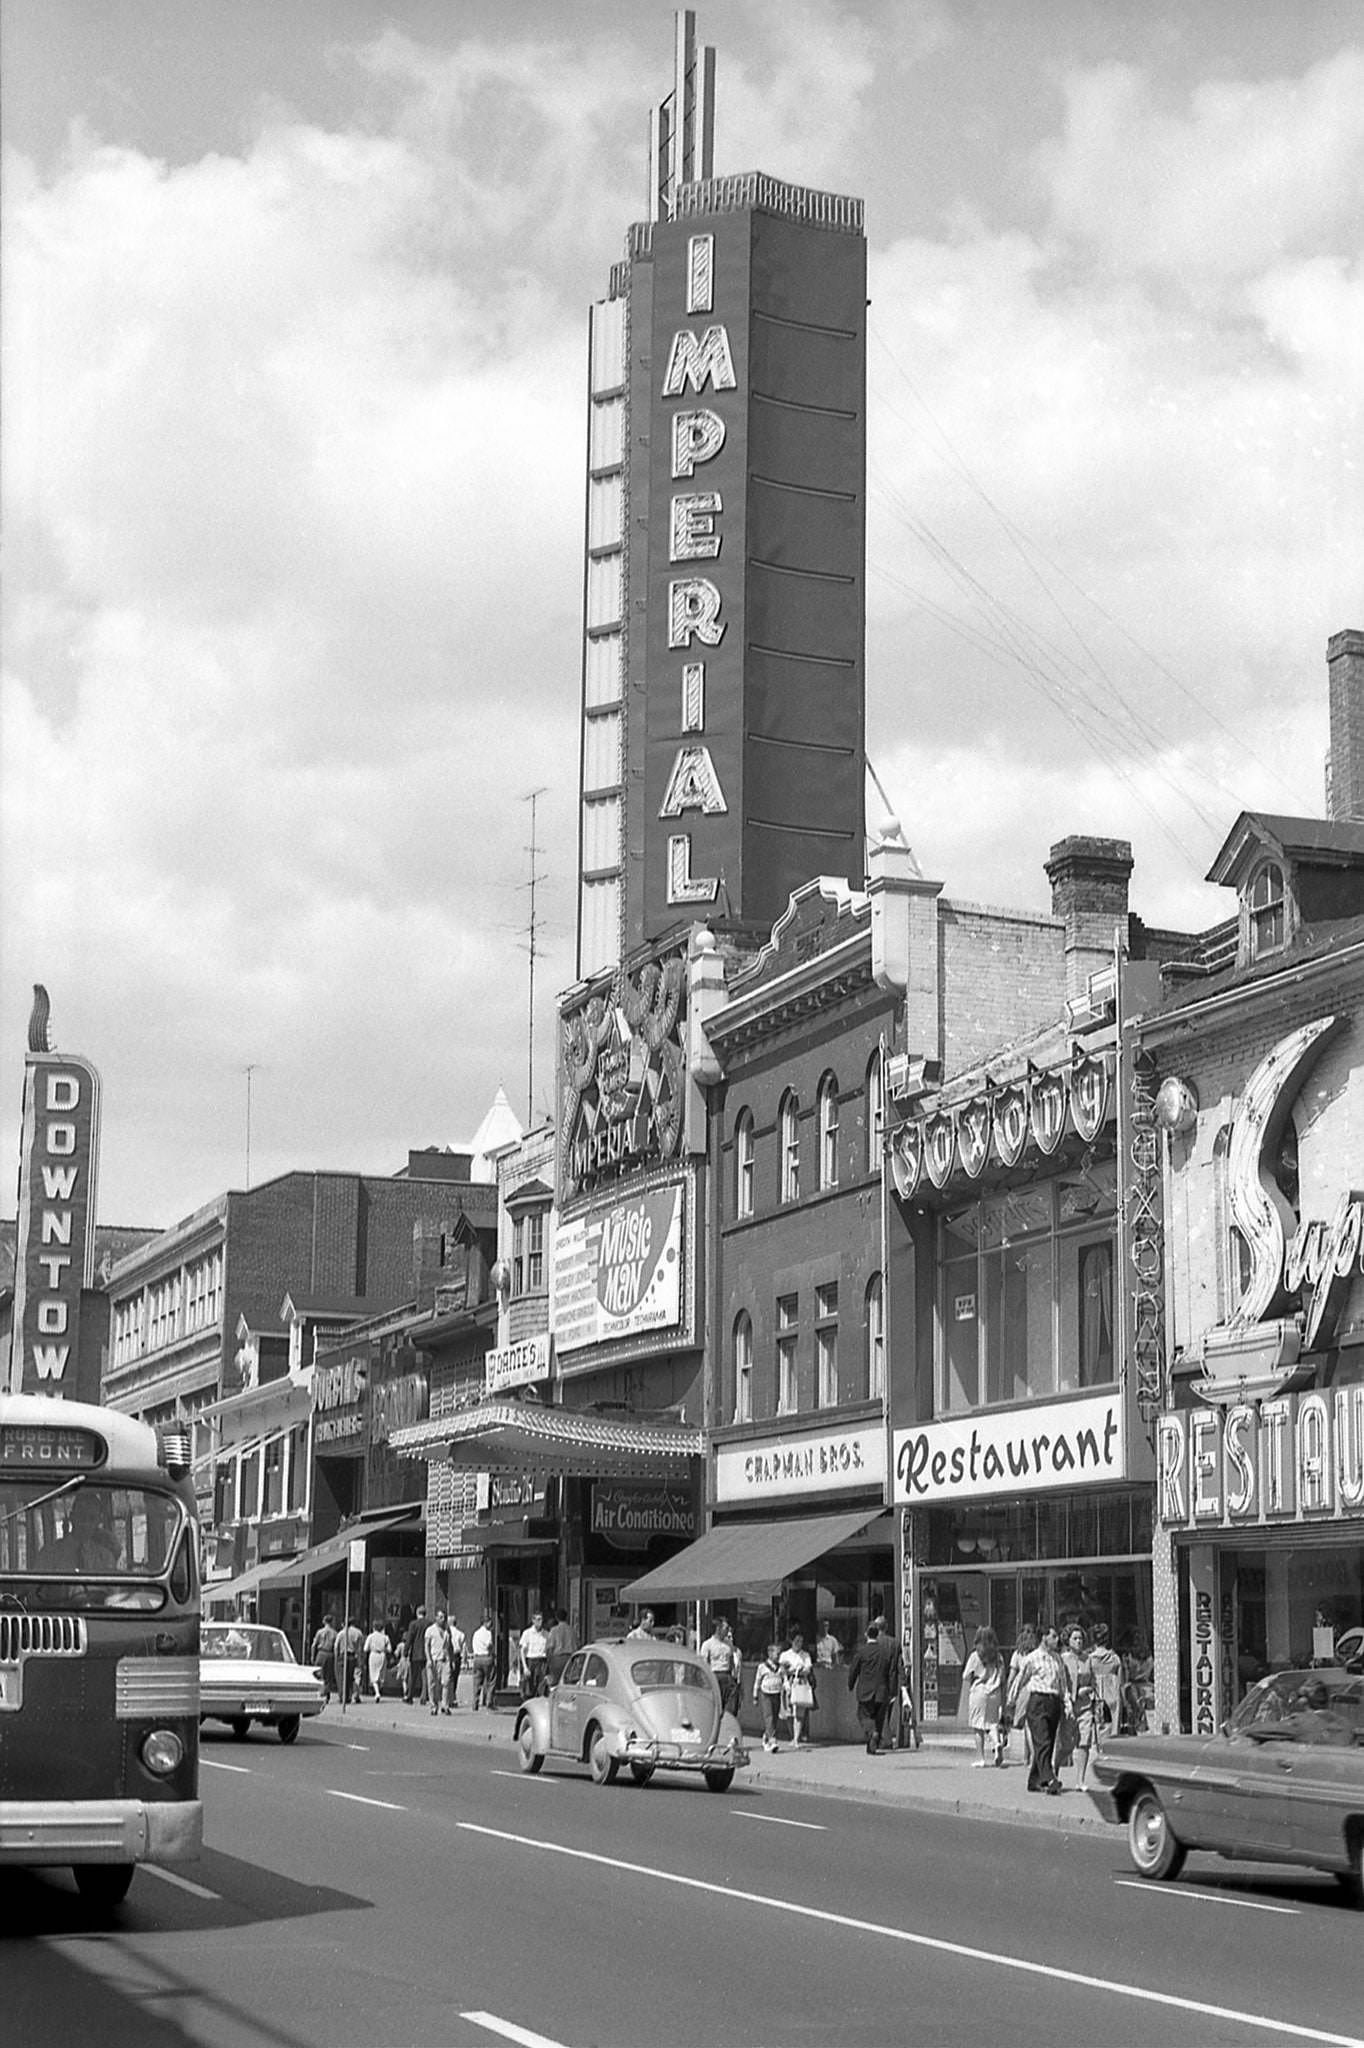 A nice look at the Imperial Theatre on Yonge St., 1962.